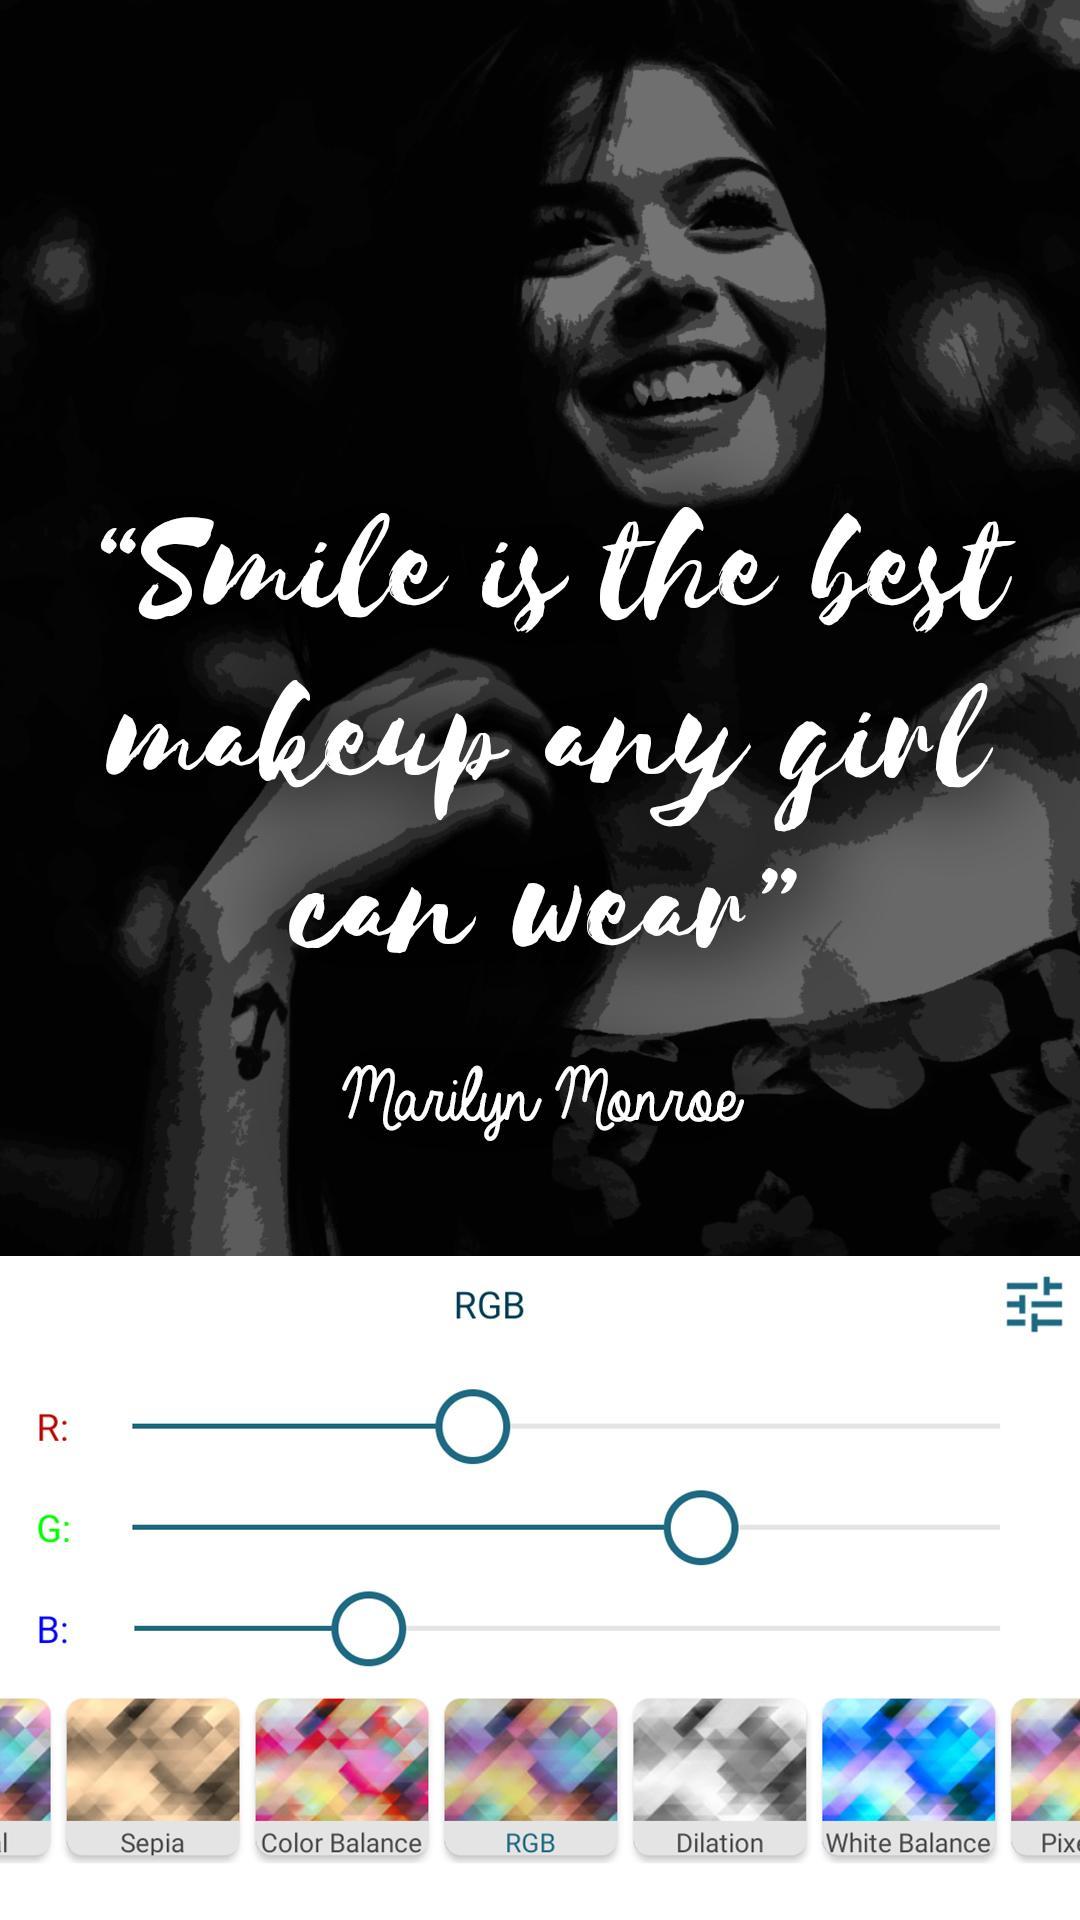 Quotes Creator for Android - APK Download